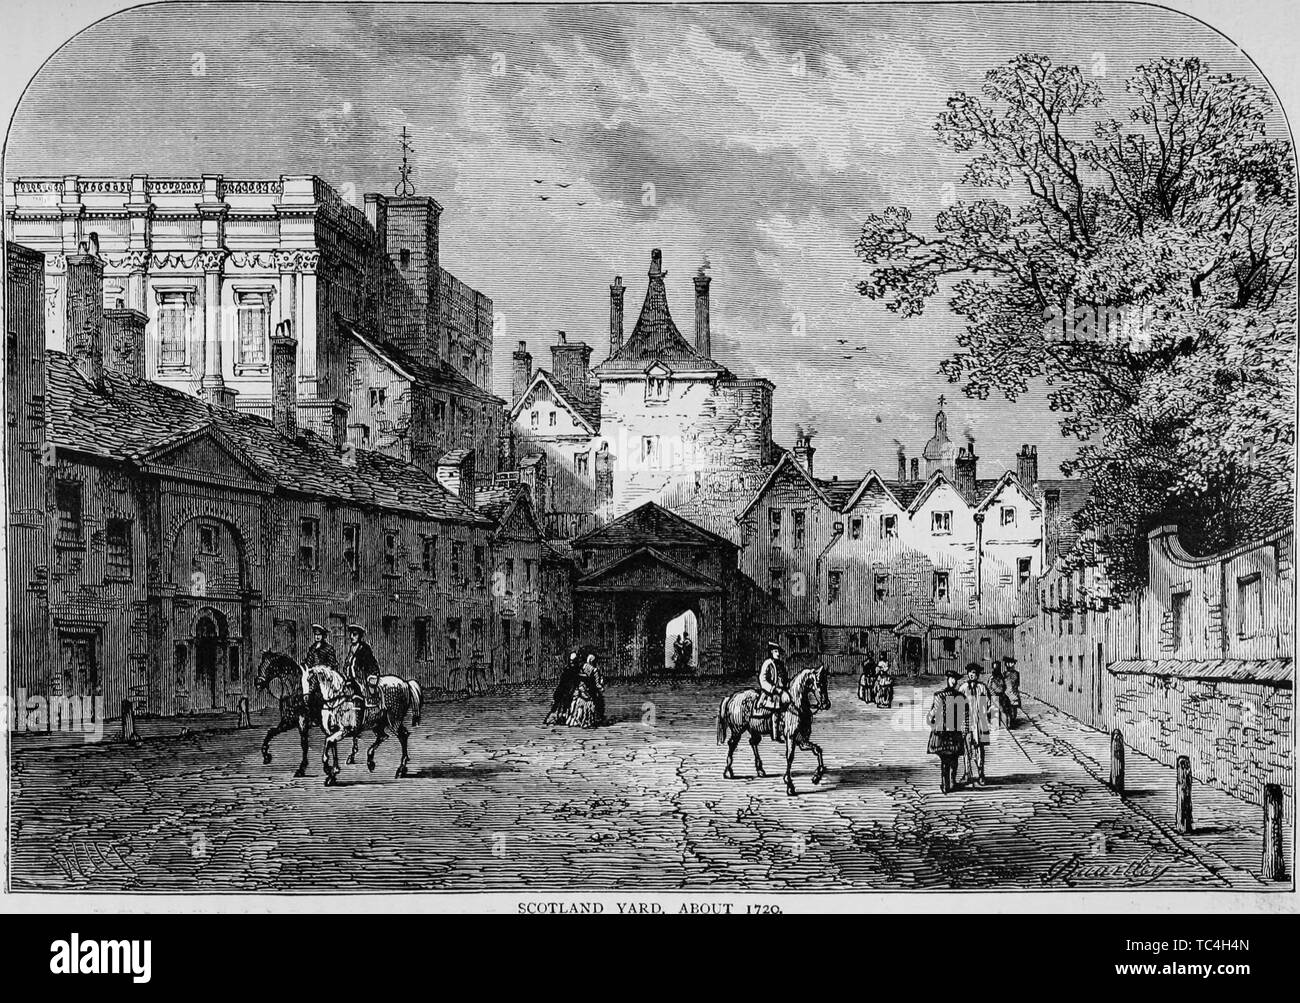 Engraving of the Scotland Yard at Whitehall, London, England, from the book 'Old and new London: a narrative of its history, its people, and its places' by Thornbury Walter, 1873. Courtesy Internet Archive. () Stock Photo